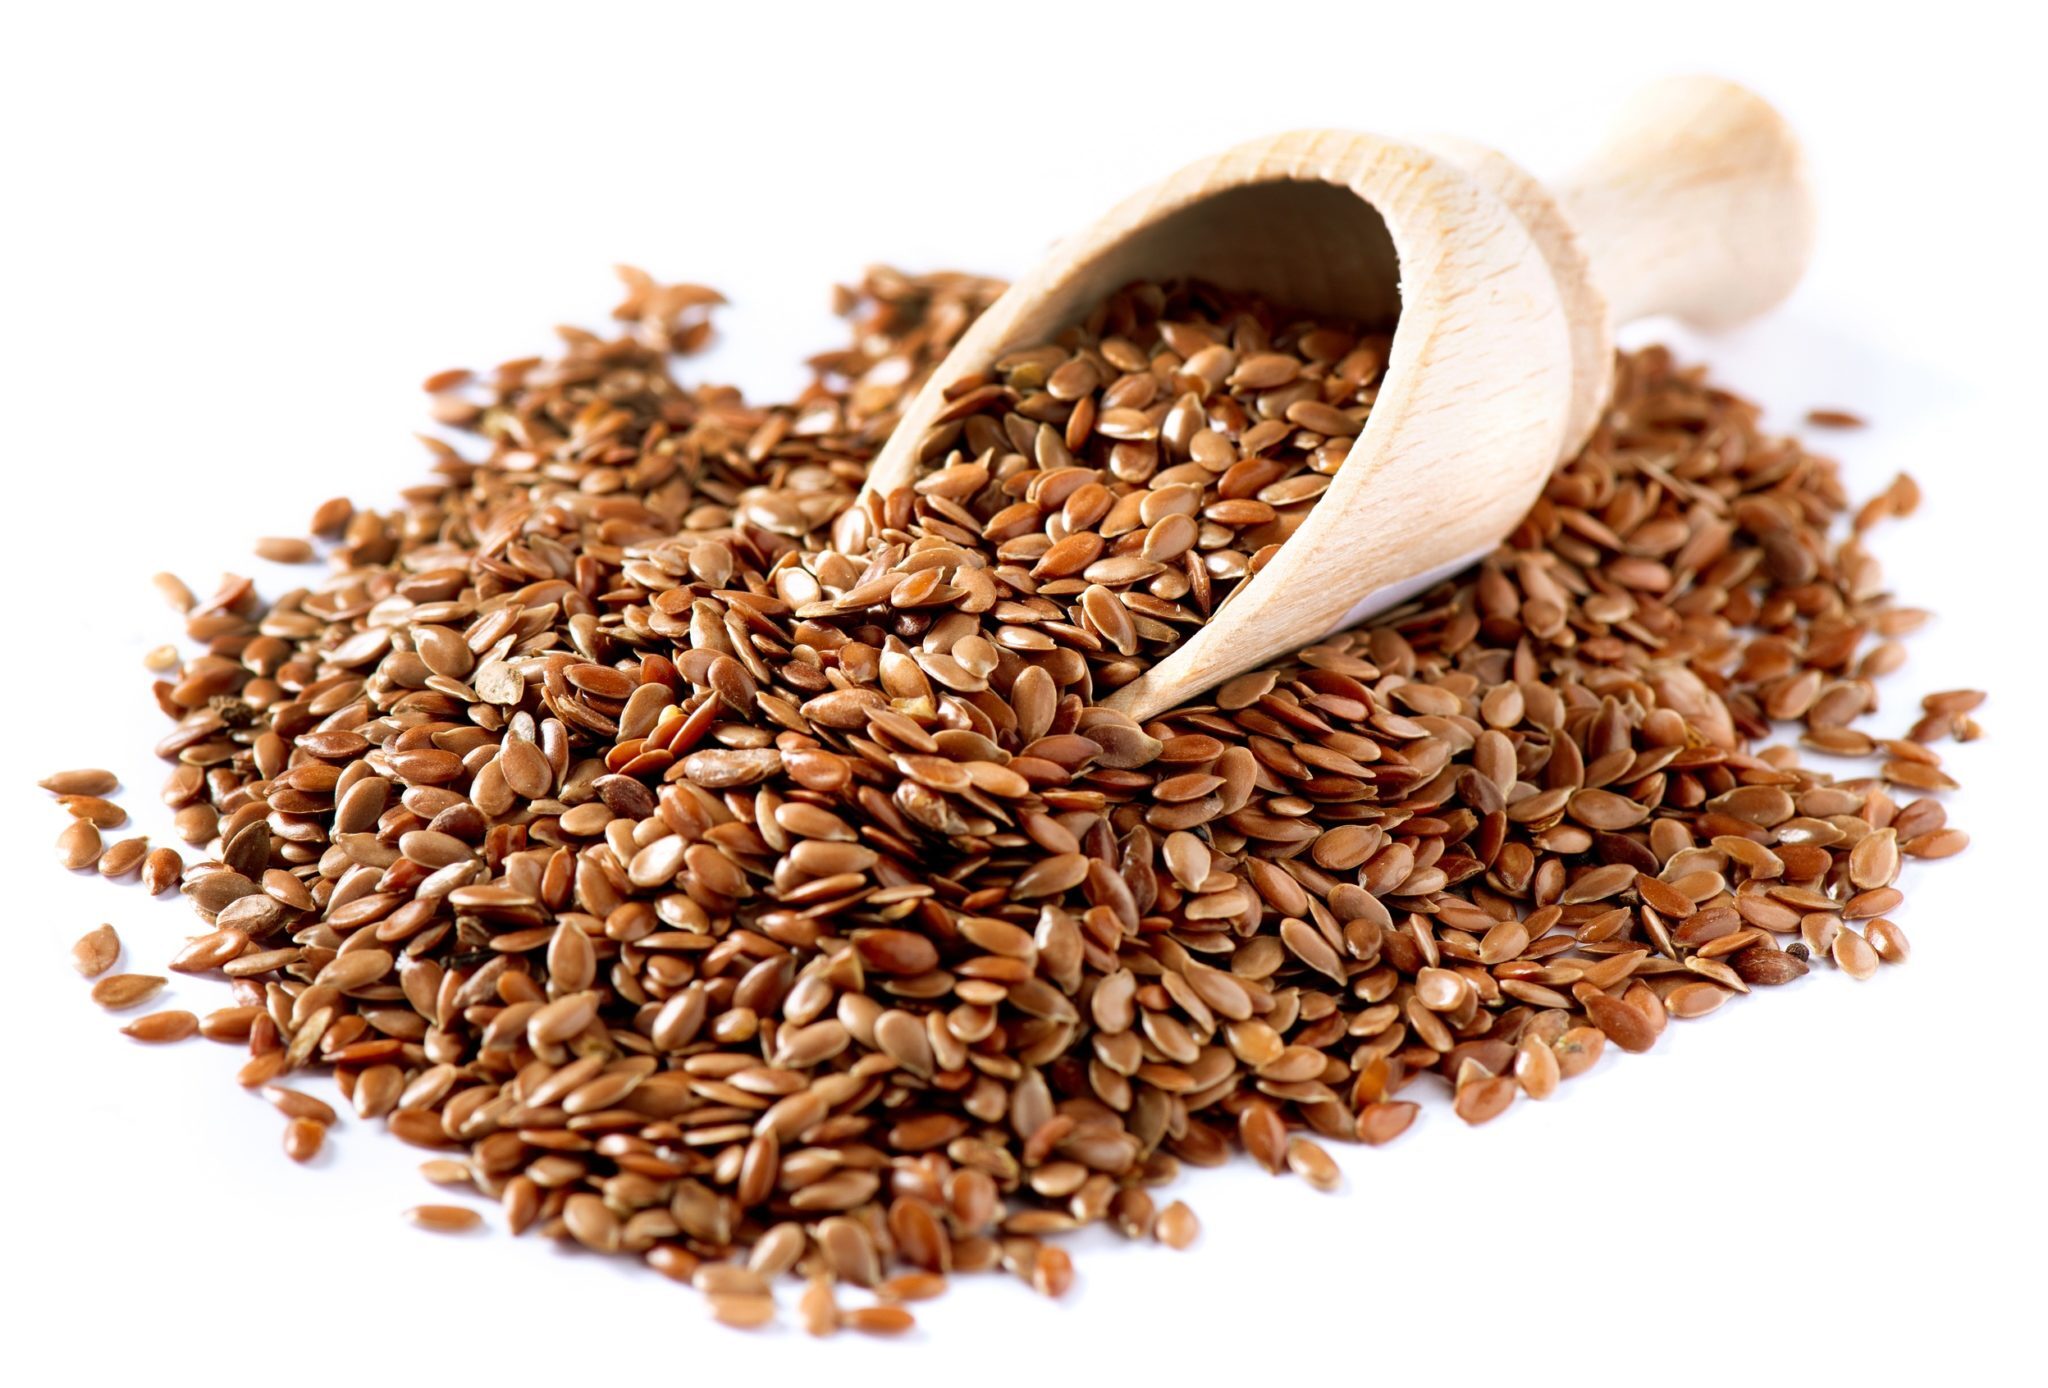 flax-seeds-linseed-lin-seeds-close-up